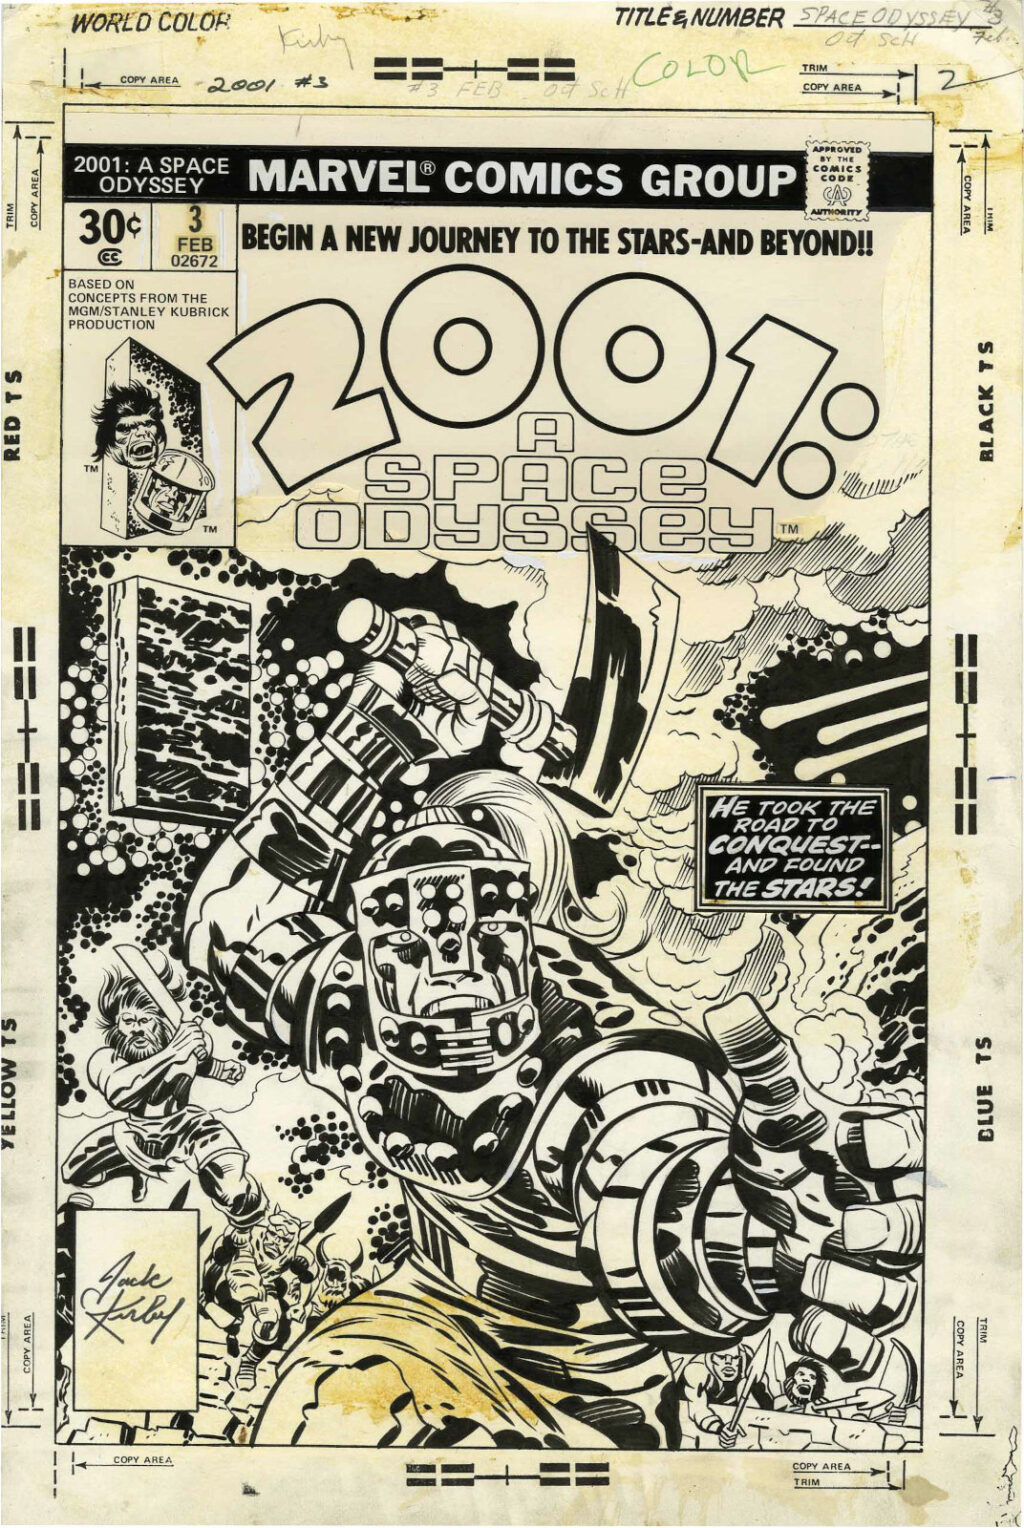 2001 A Space Odyssey issue 3 cover by Jack Kirby and John Verpoorten